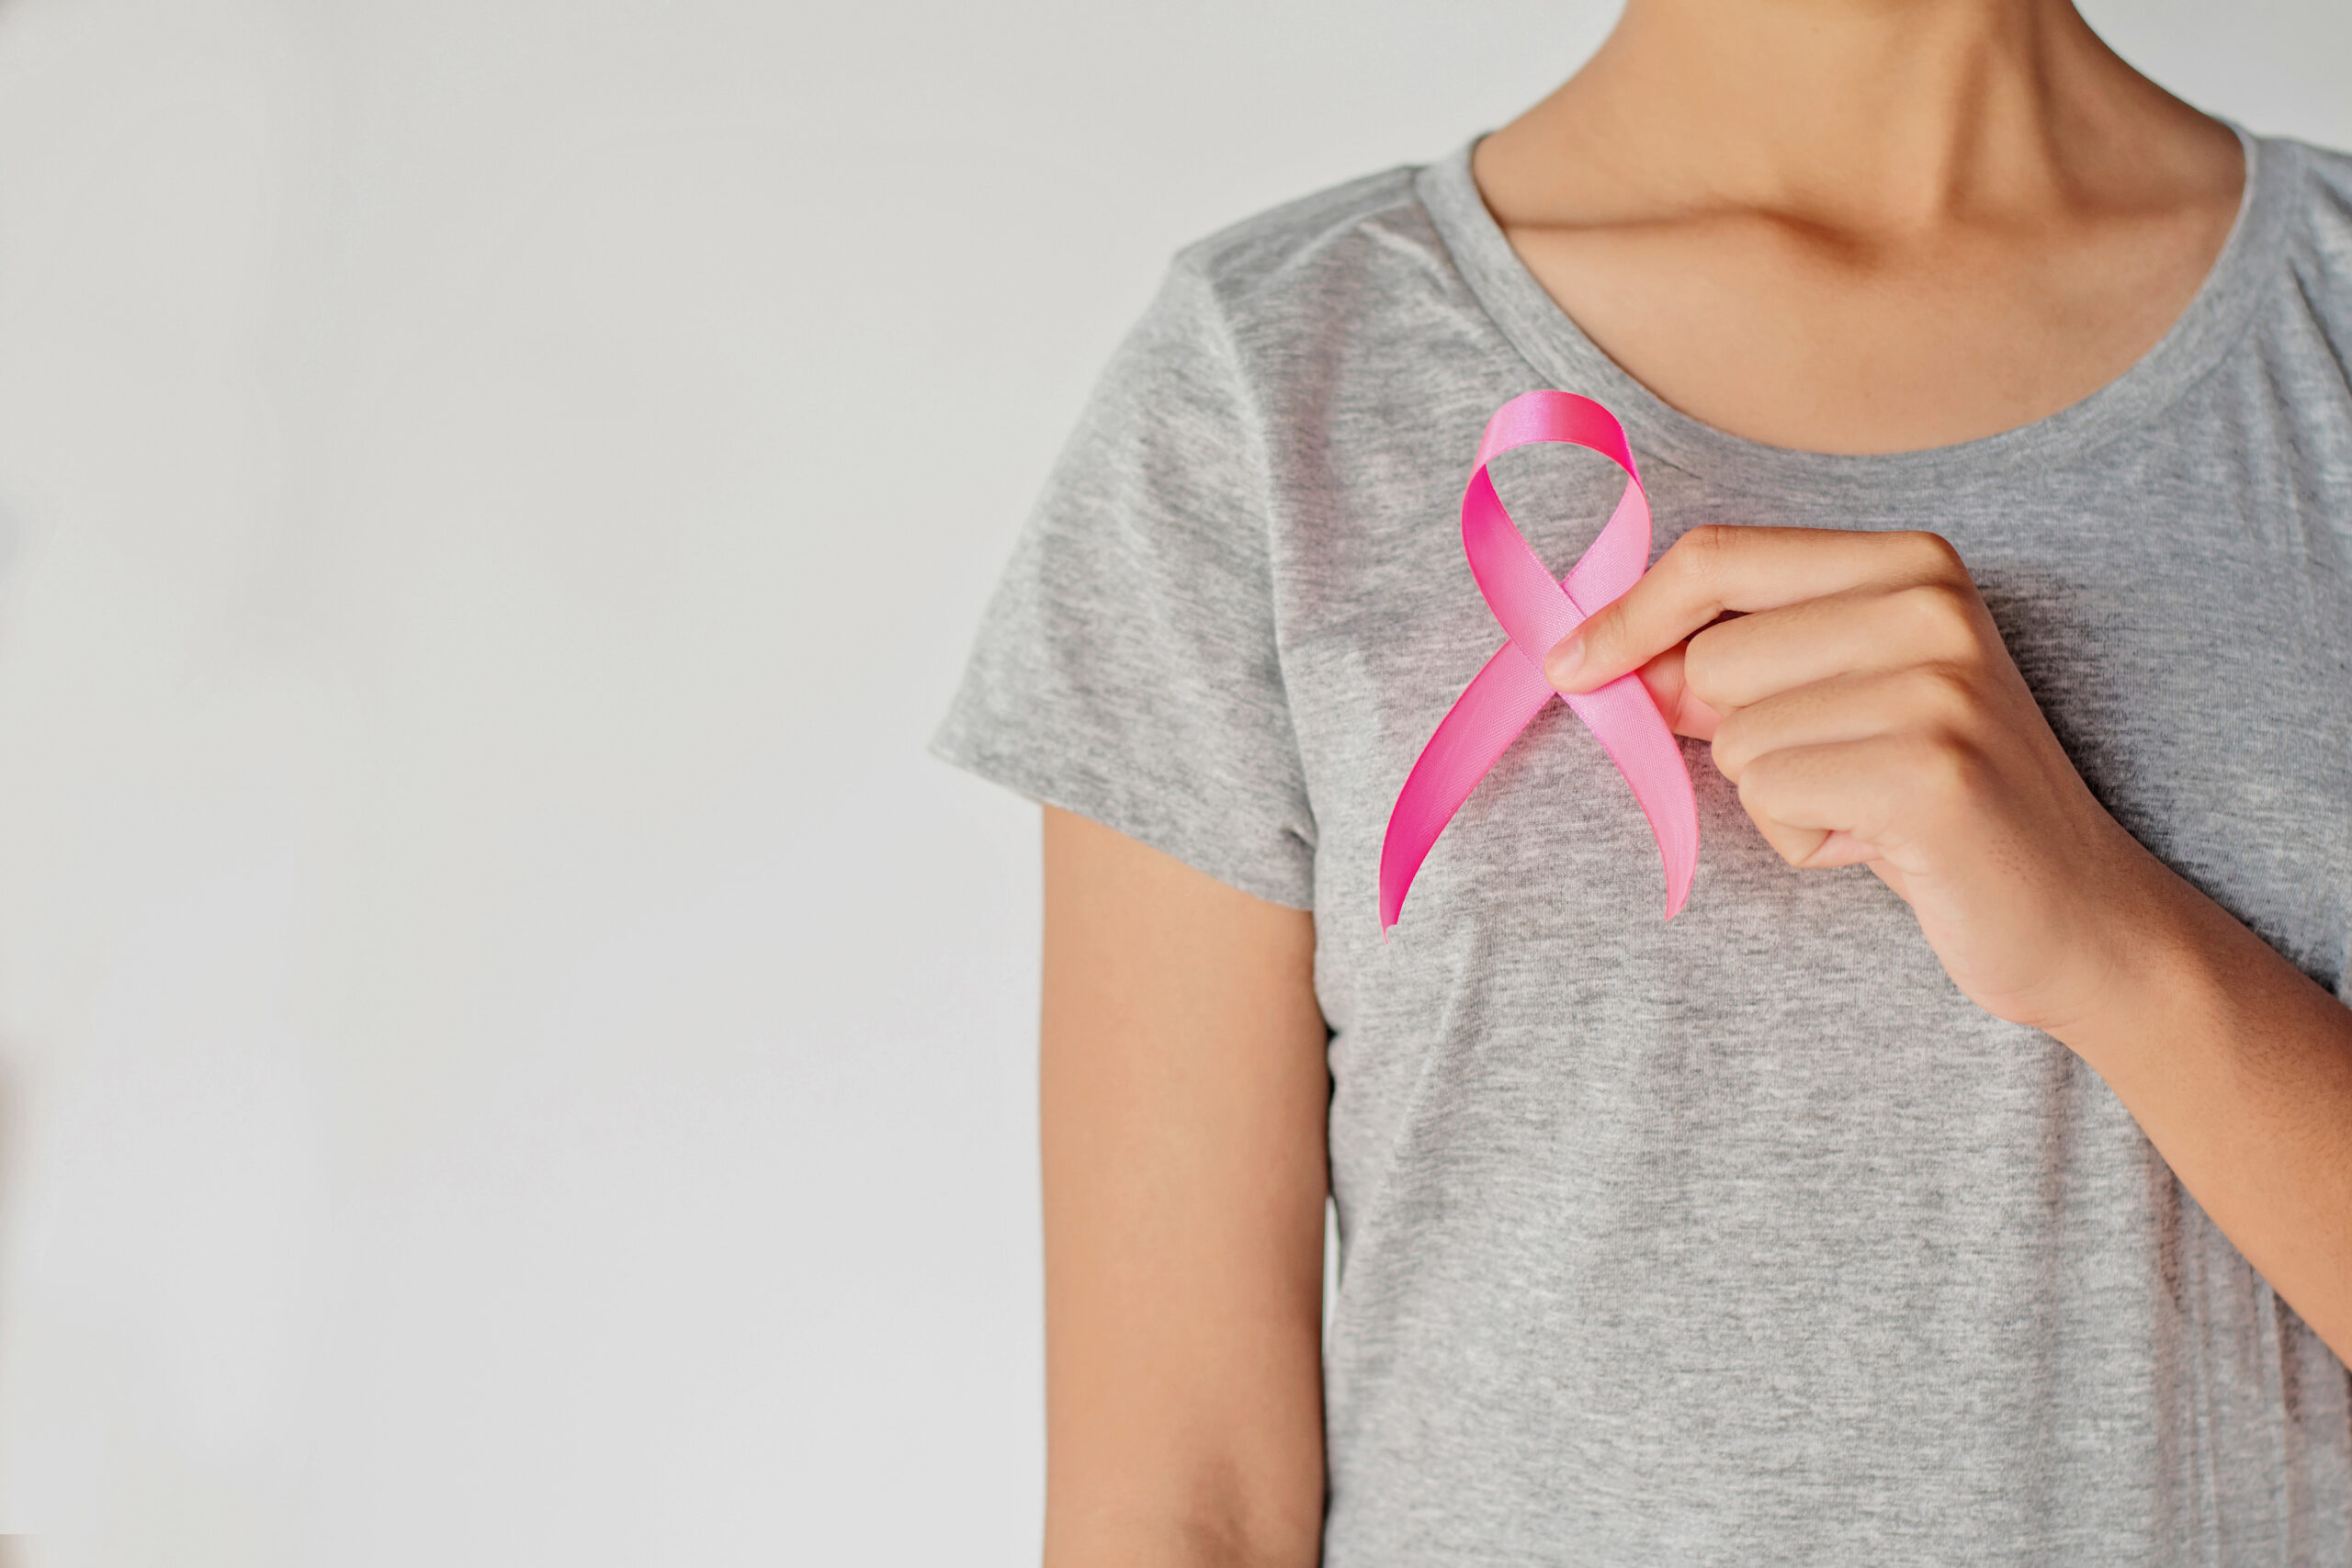 Can You Reduce Your Risk of Breast Cancer